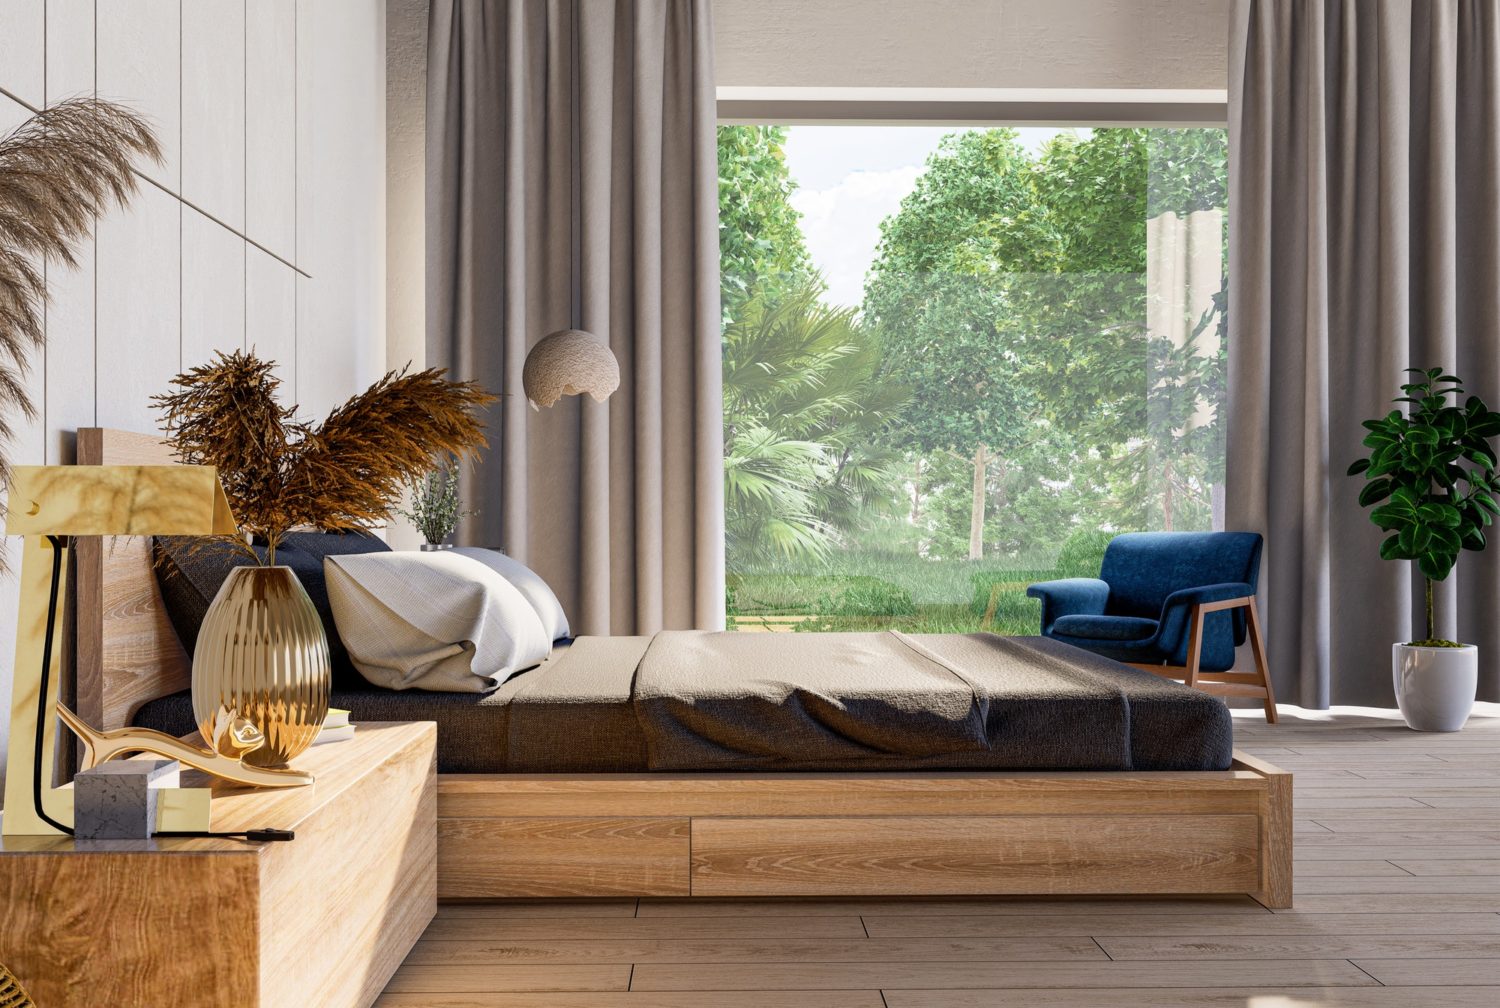 Bedroom interior and living area on nature mockup.